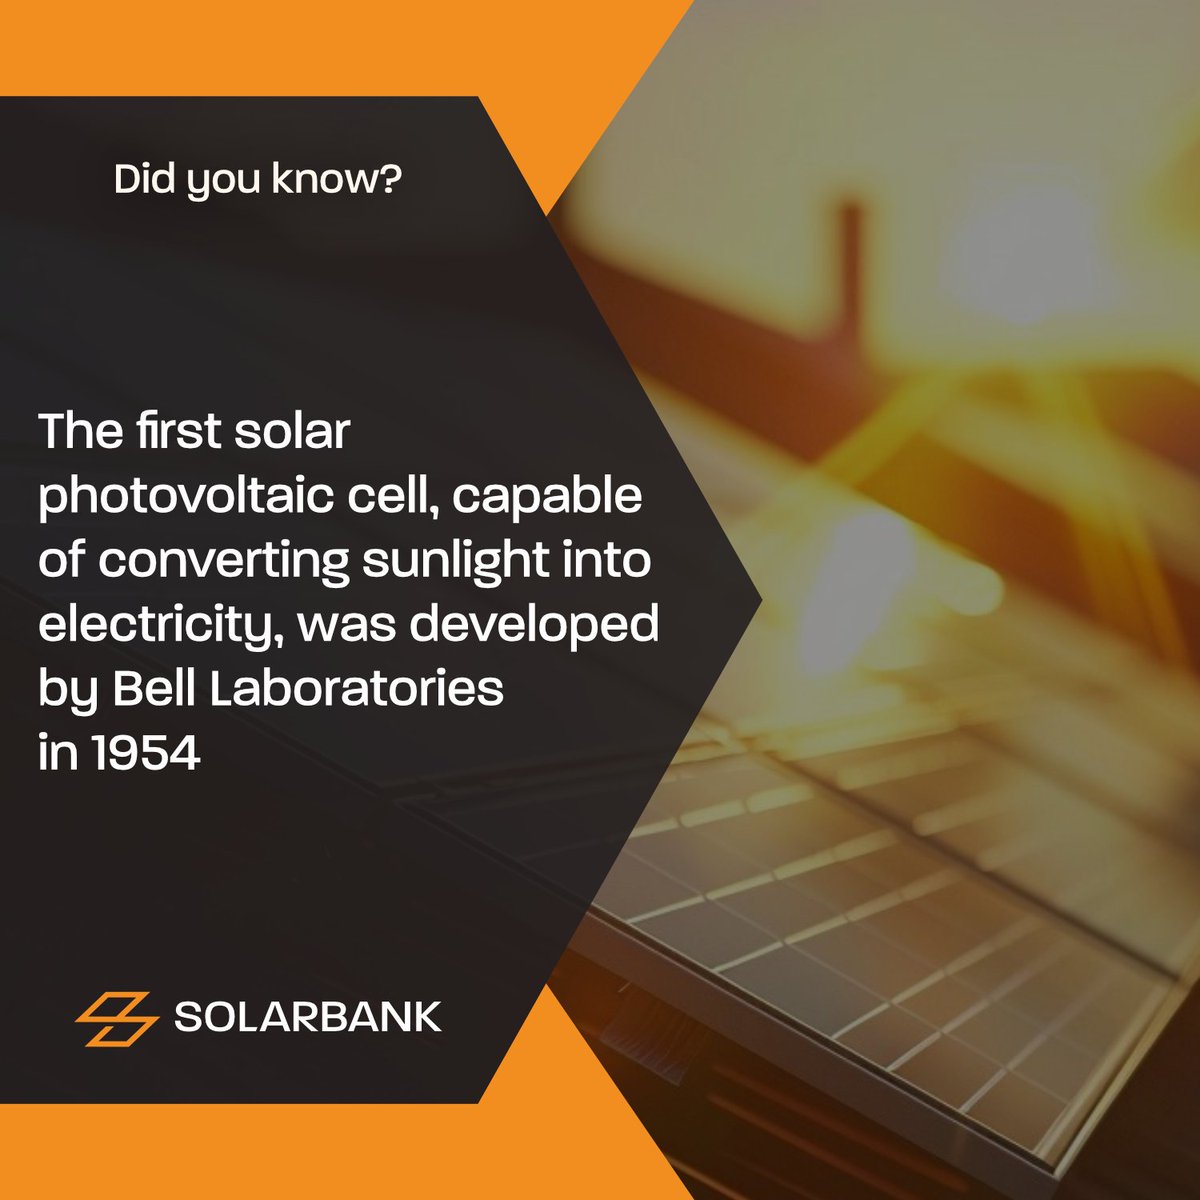 The birth of photovoltaic cells..
#sustainablefuture #solarinnovation #solarenergy #didyouknow